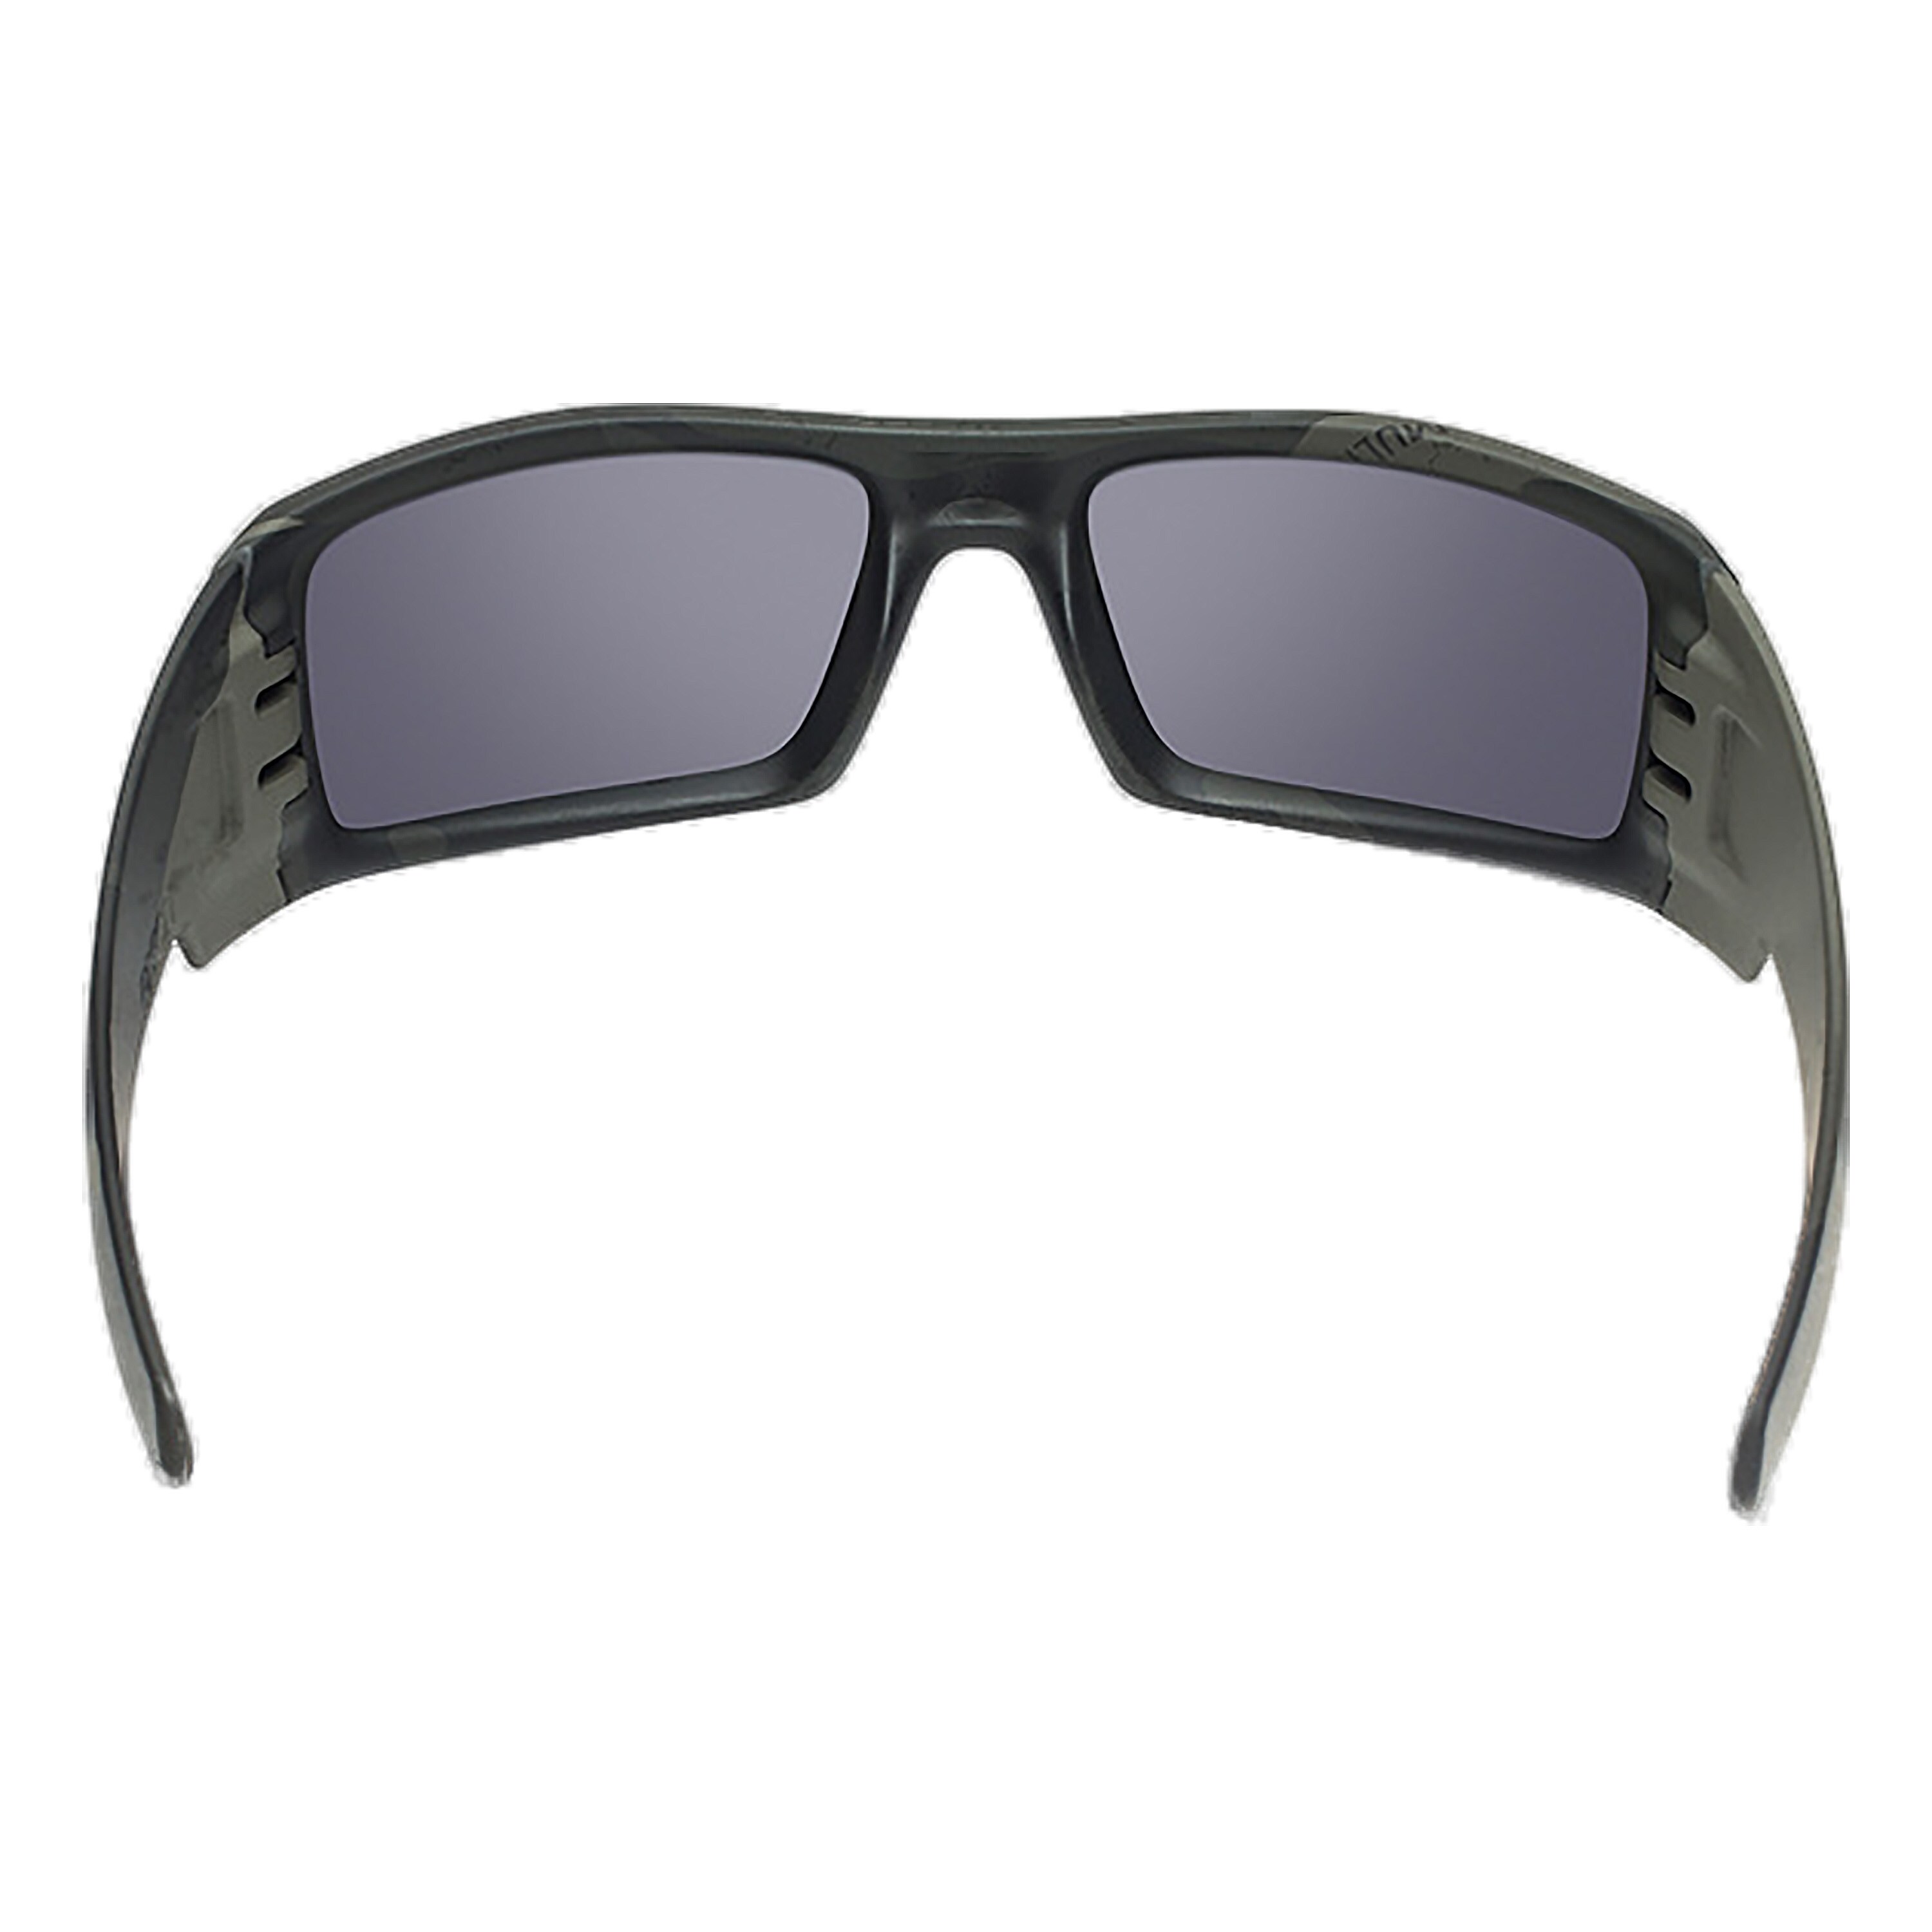 Purchase the Oakley Sunglasses SI Gascan multicam black by ASMC